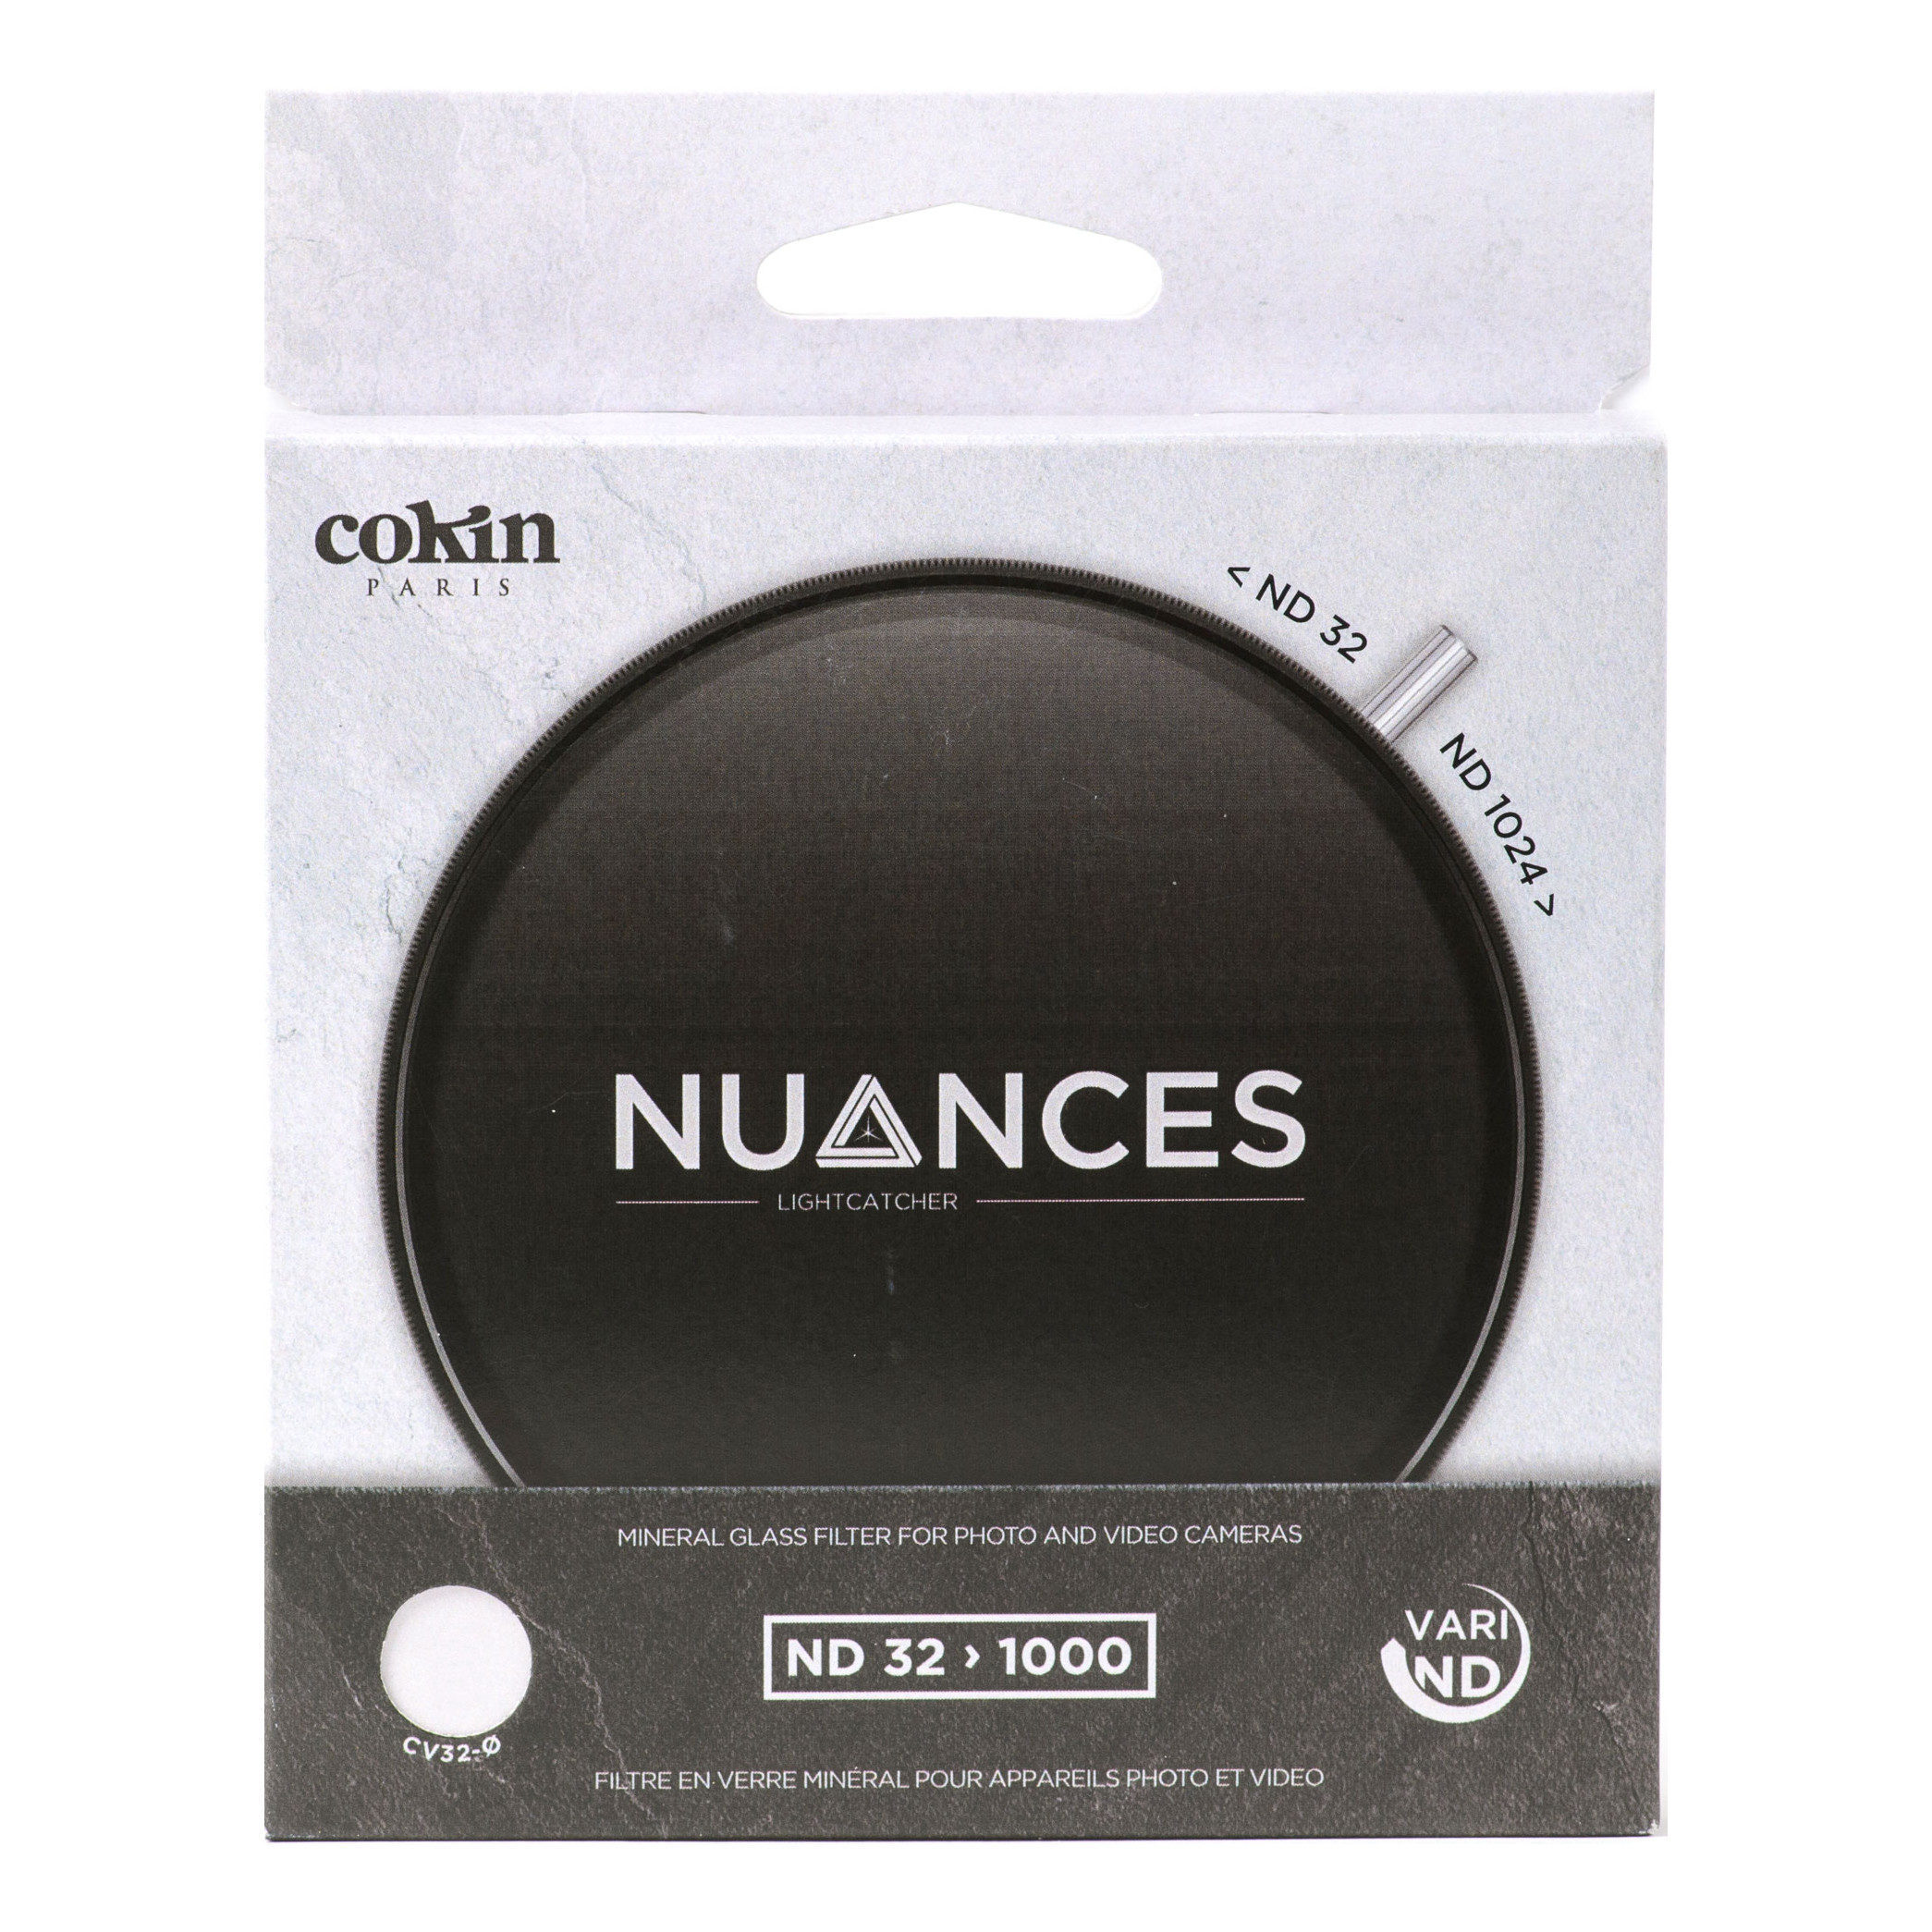 Cokin Round NUANCES NDX 32 1000 72mm 5 10 f stops